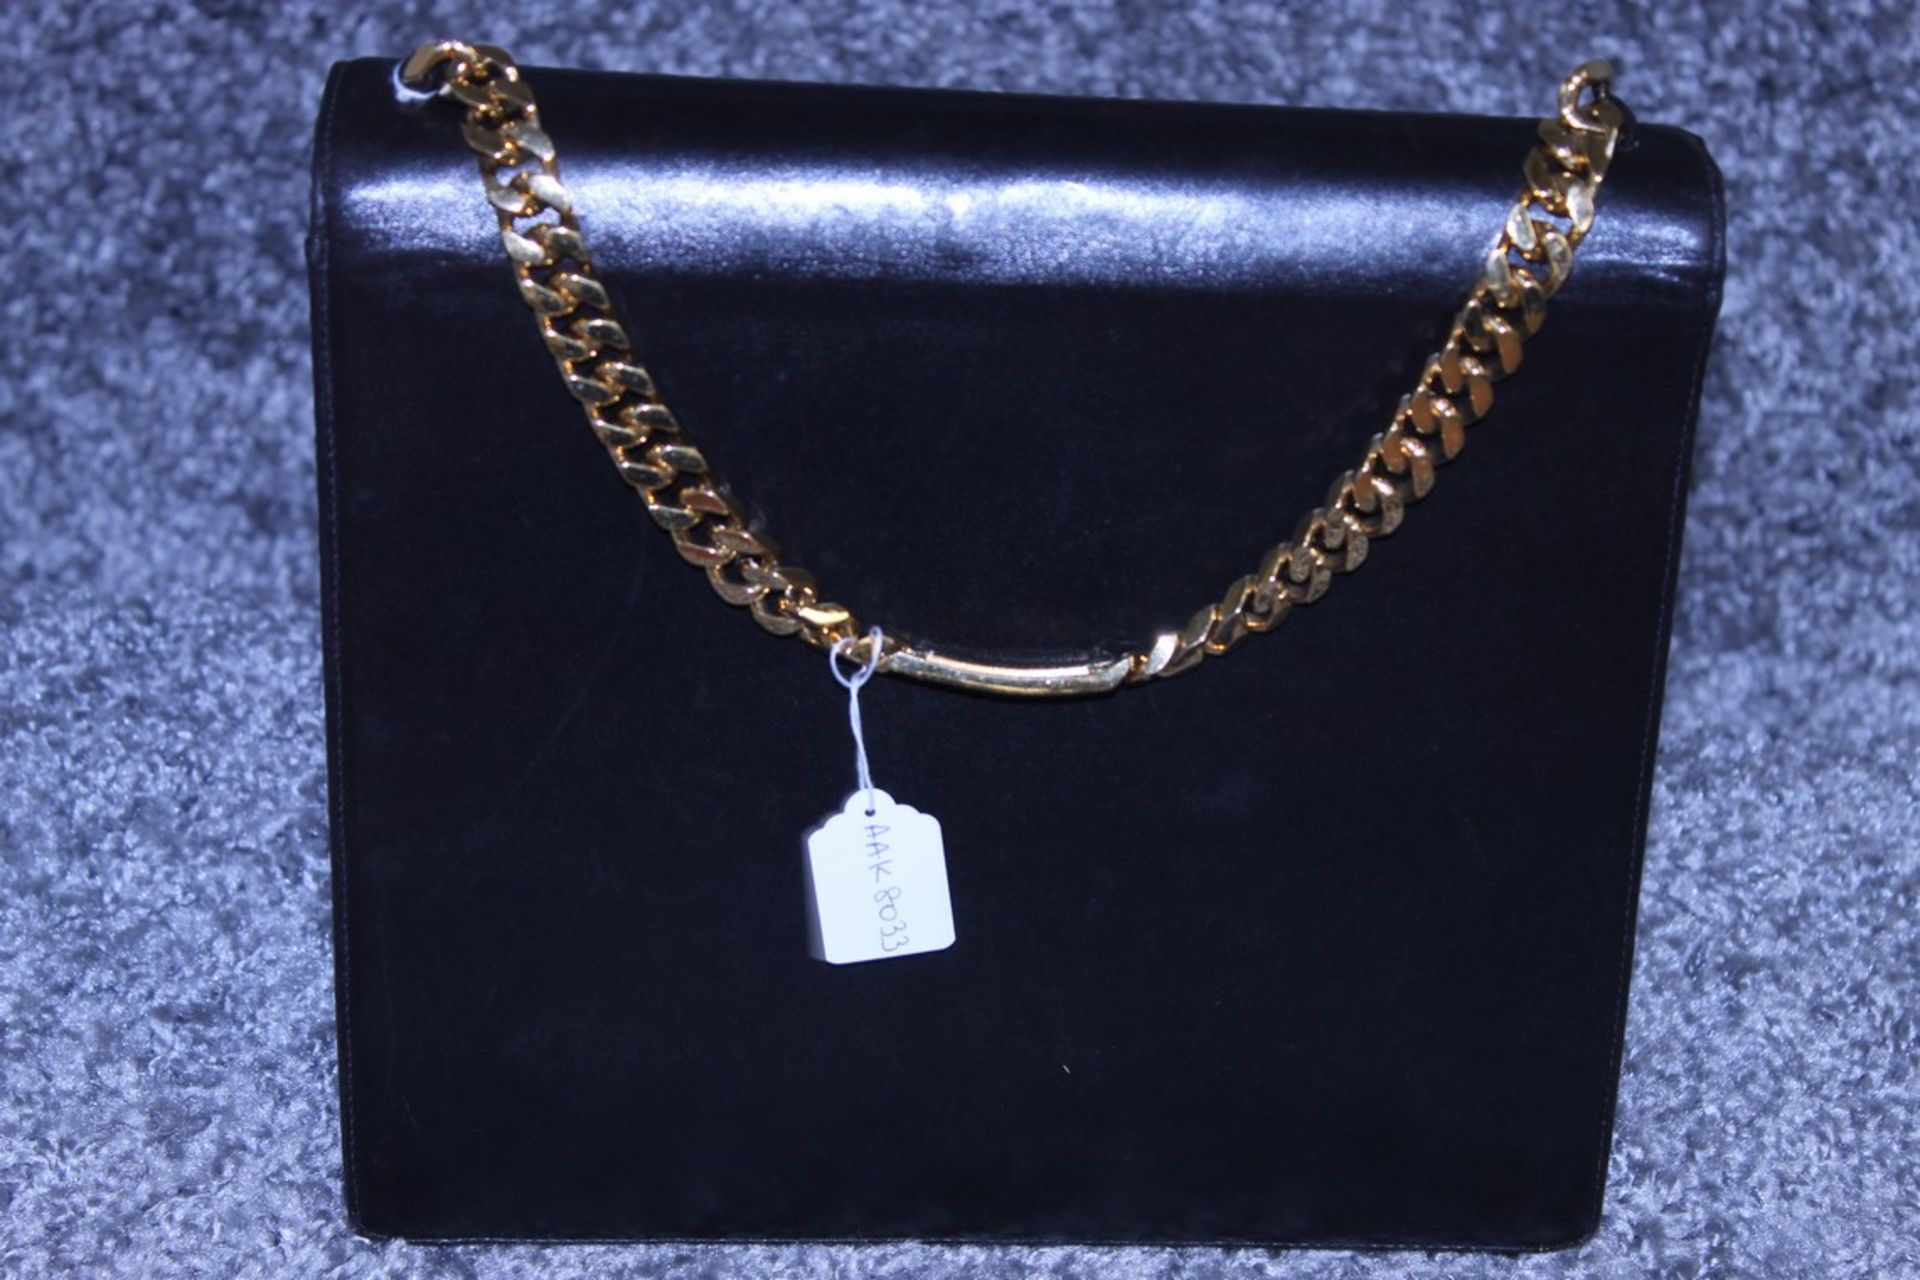 RRP £2000 Chanel Tall Logo Flap Chain Tote Shoulder Bag In Black Leather With Gold Chain Handles - Image 2 of 5